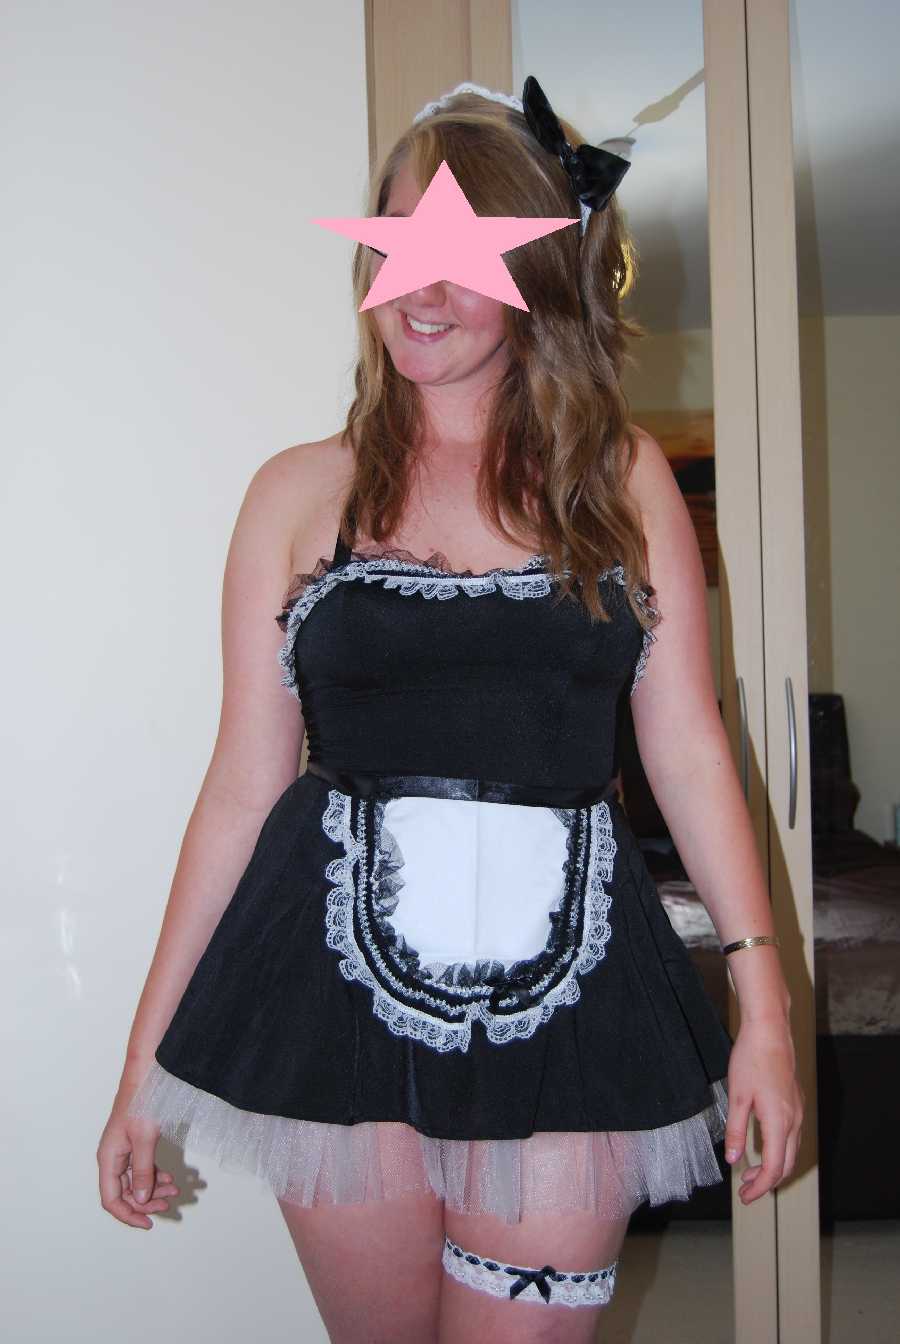 Girlfriend in Maid Outfit